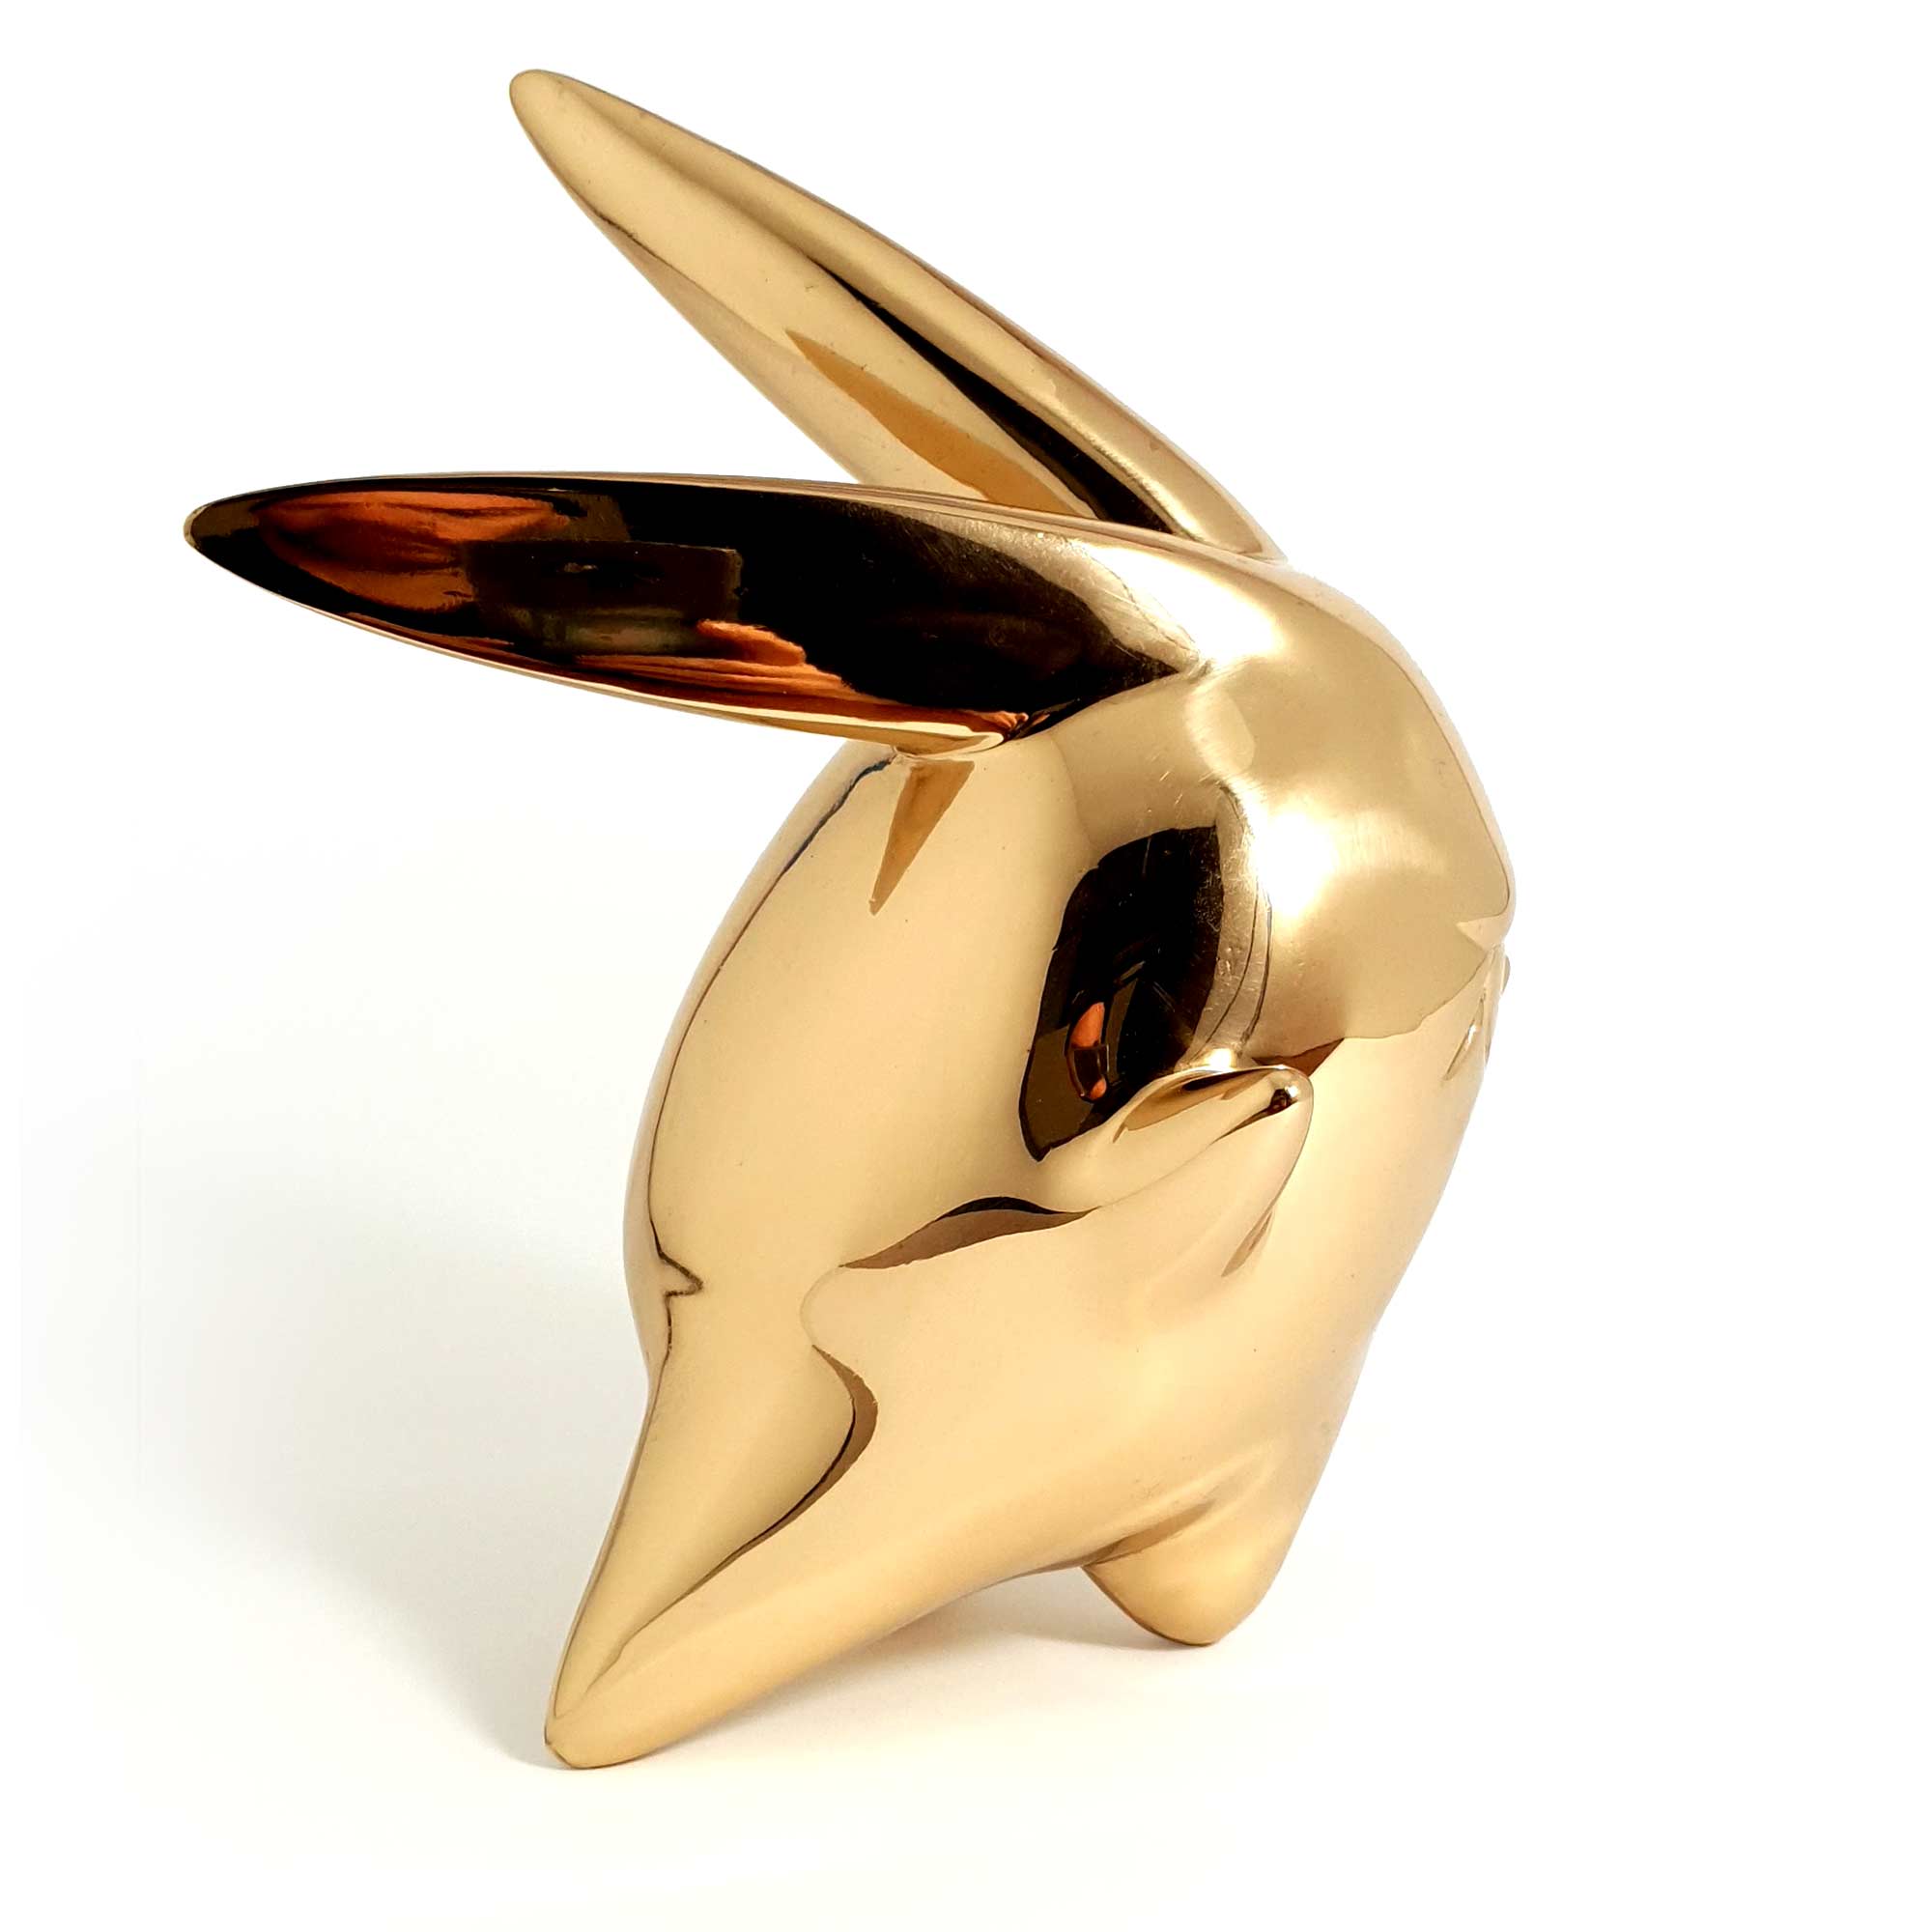 Flight or Fight, bunny rabbit sculpture, gold Mirror Polished Stainless Steel Sculpture, by artist Ferdi B Dick, side view